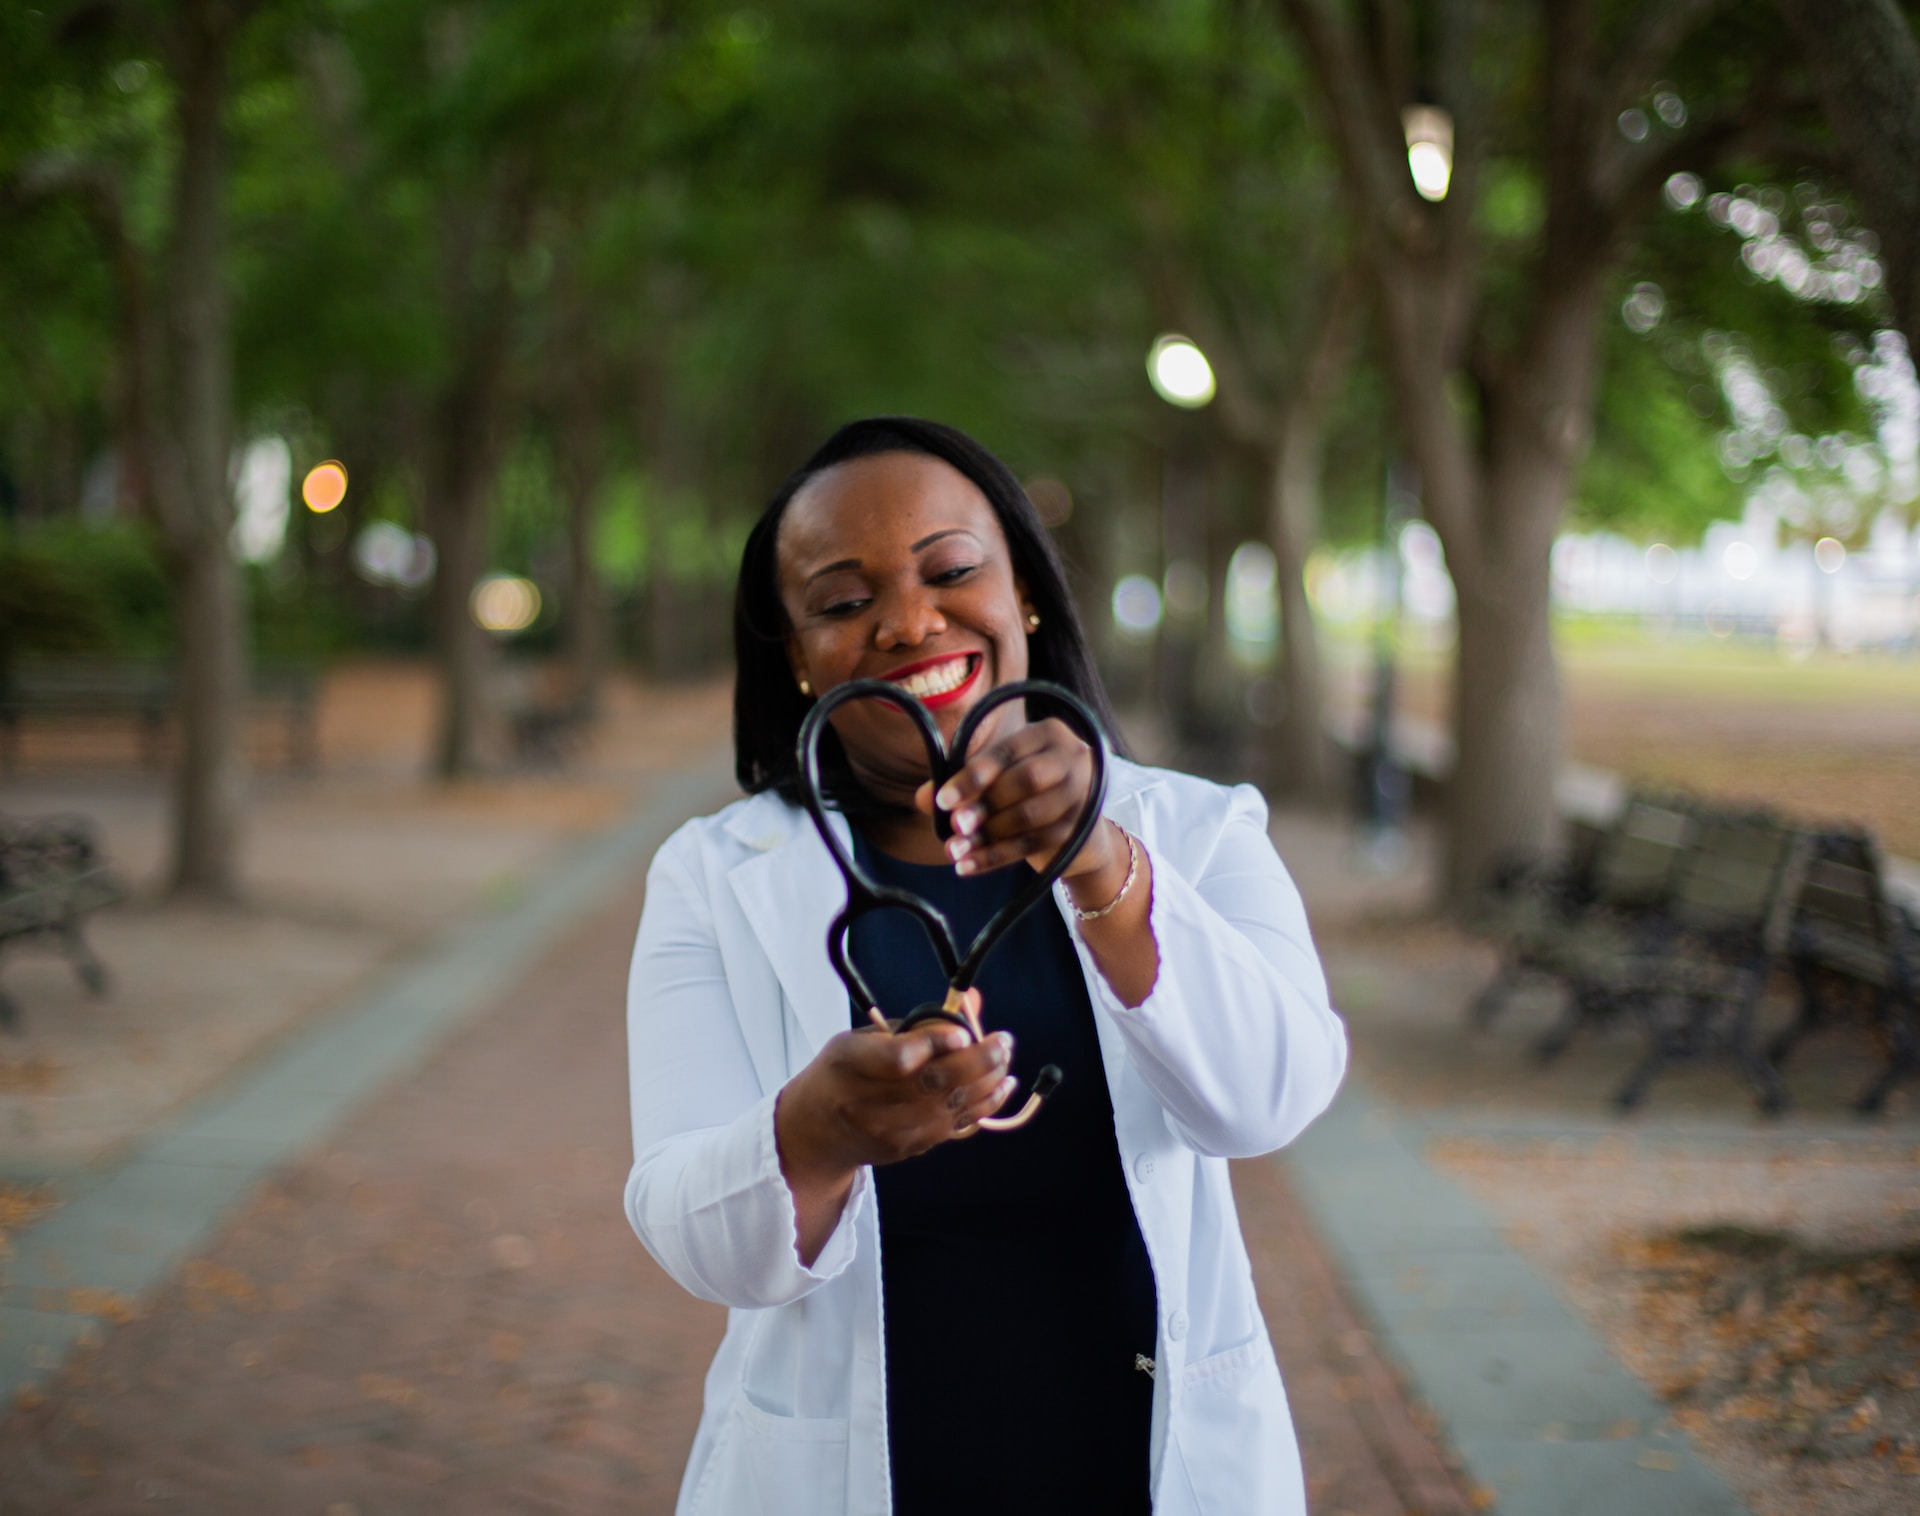 Doctor in park forms stethoscope into heart